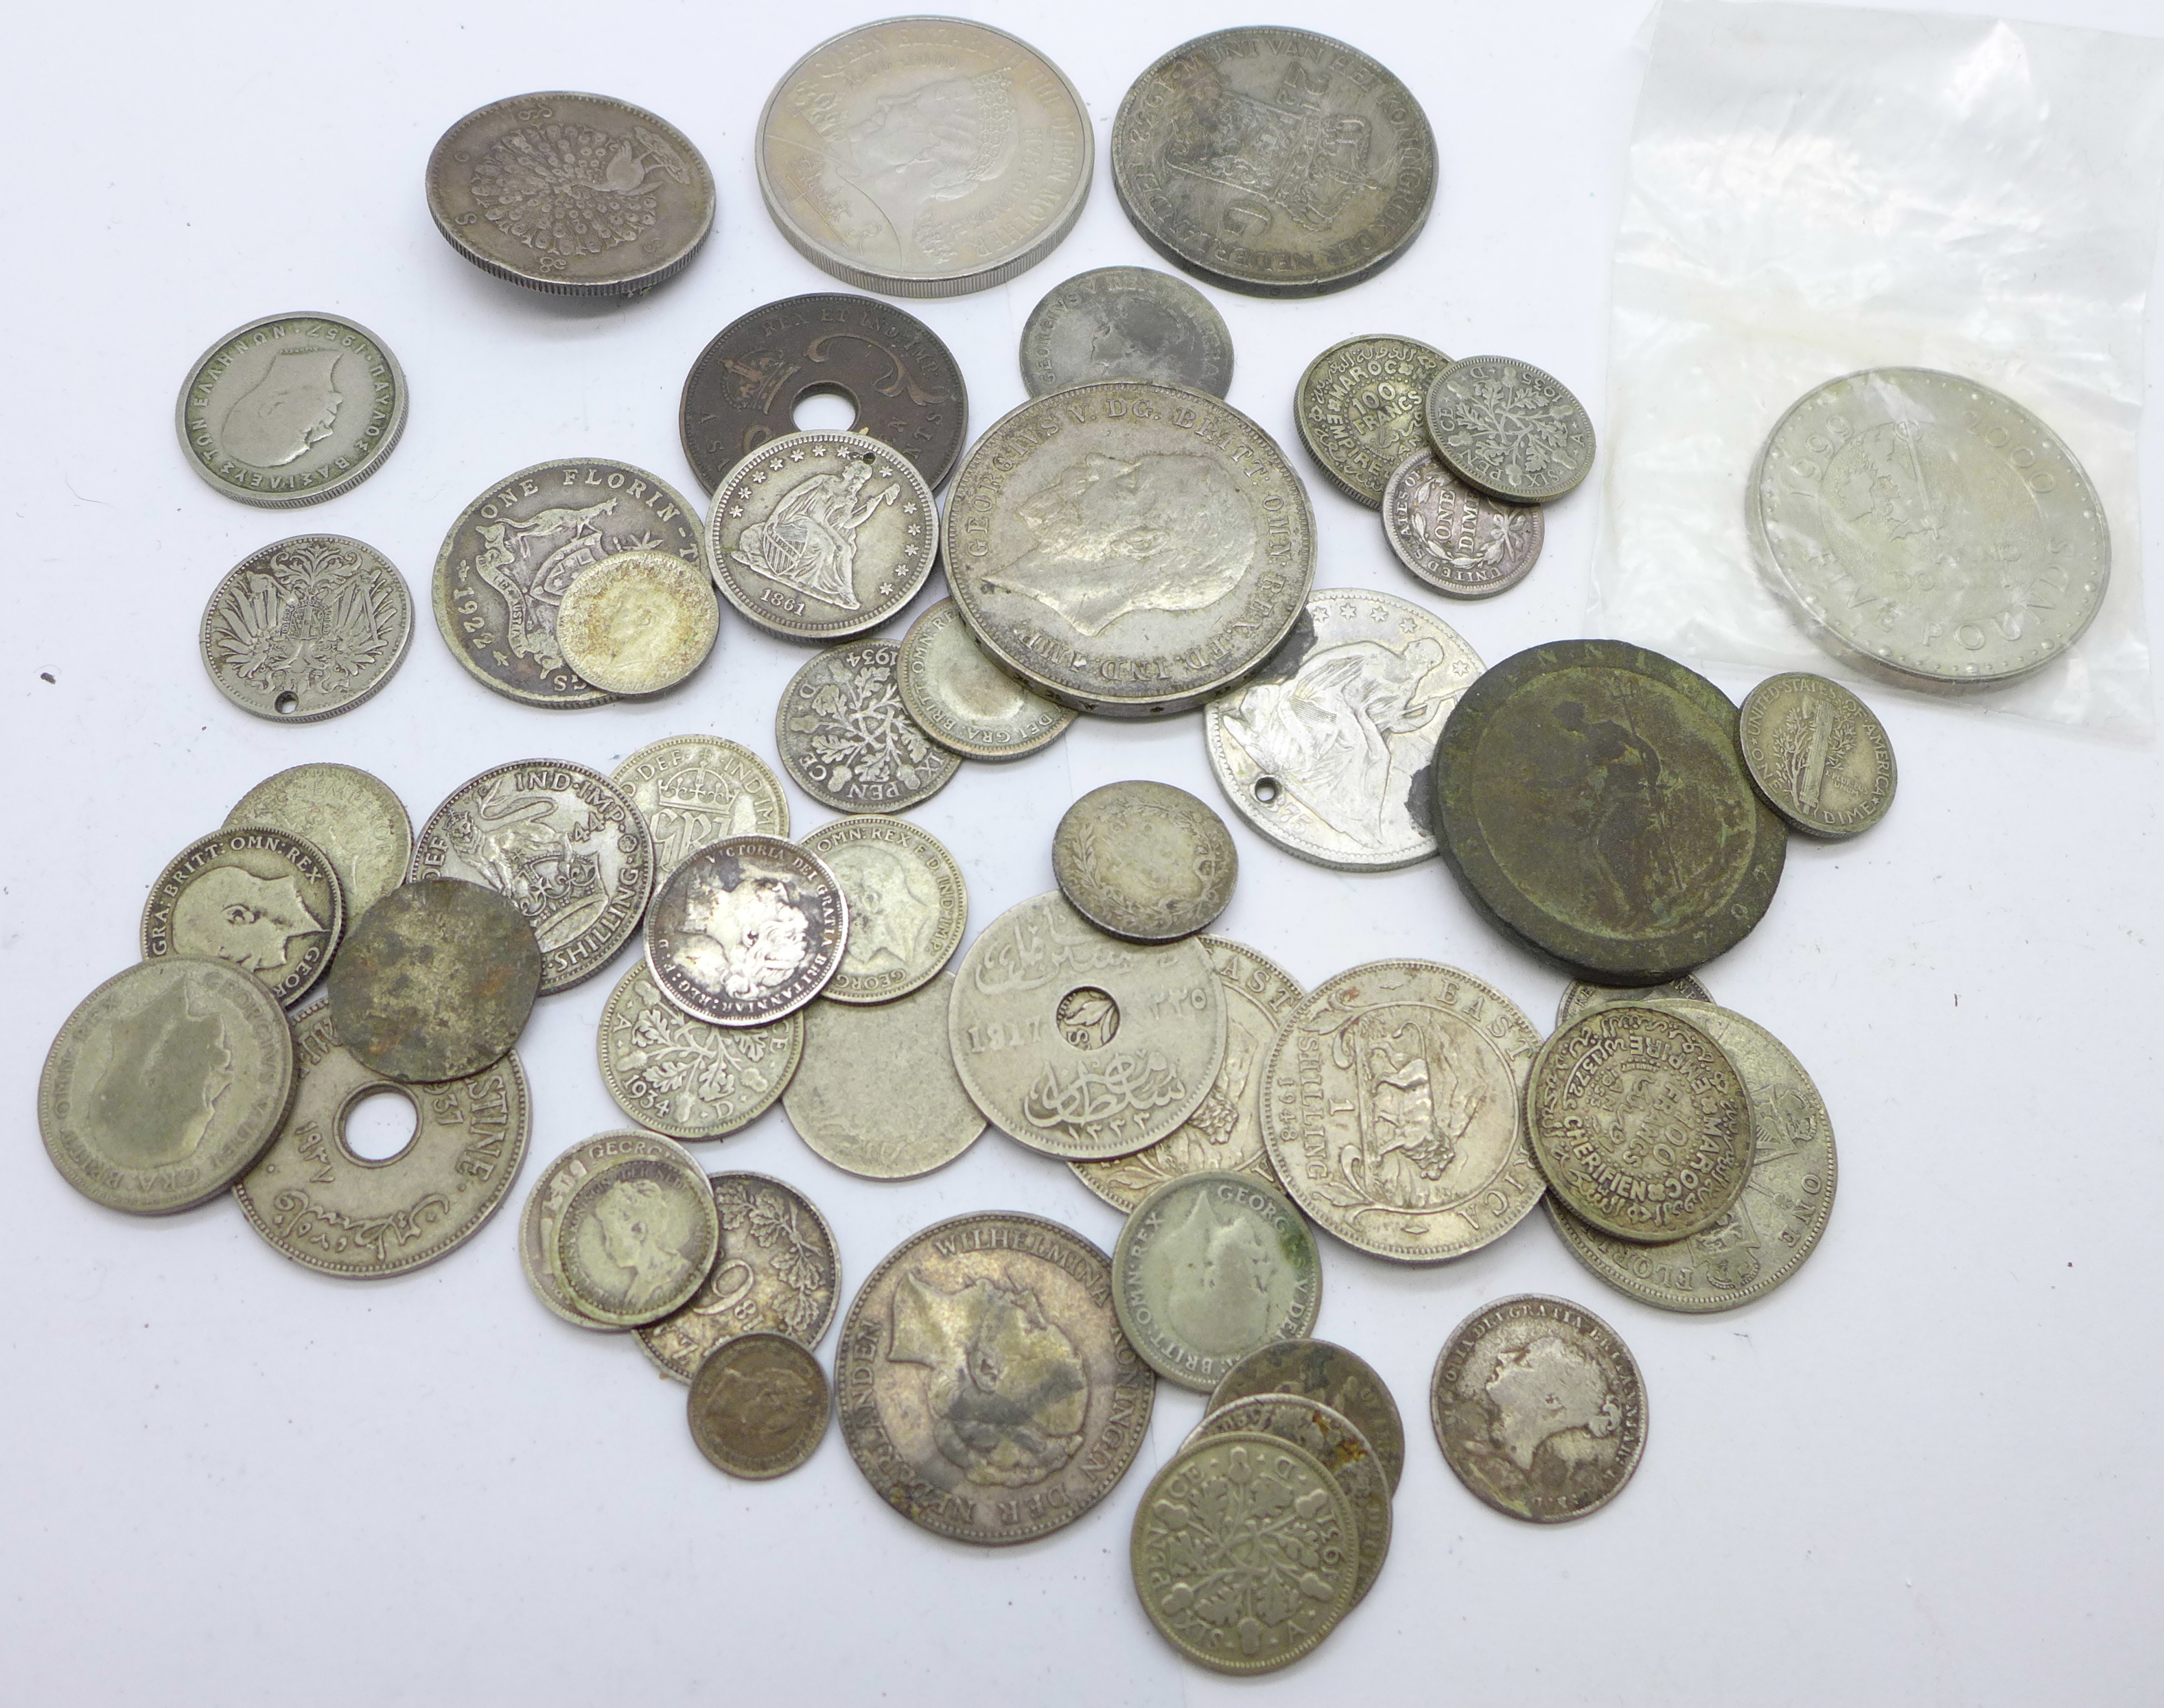 Coins including silver